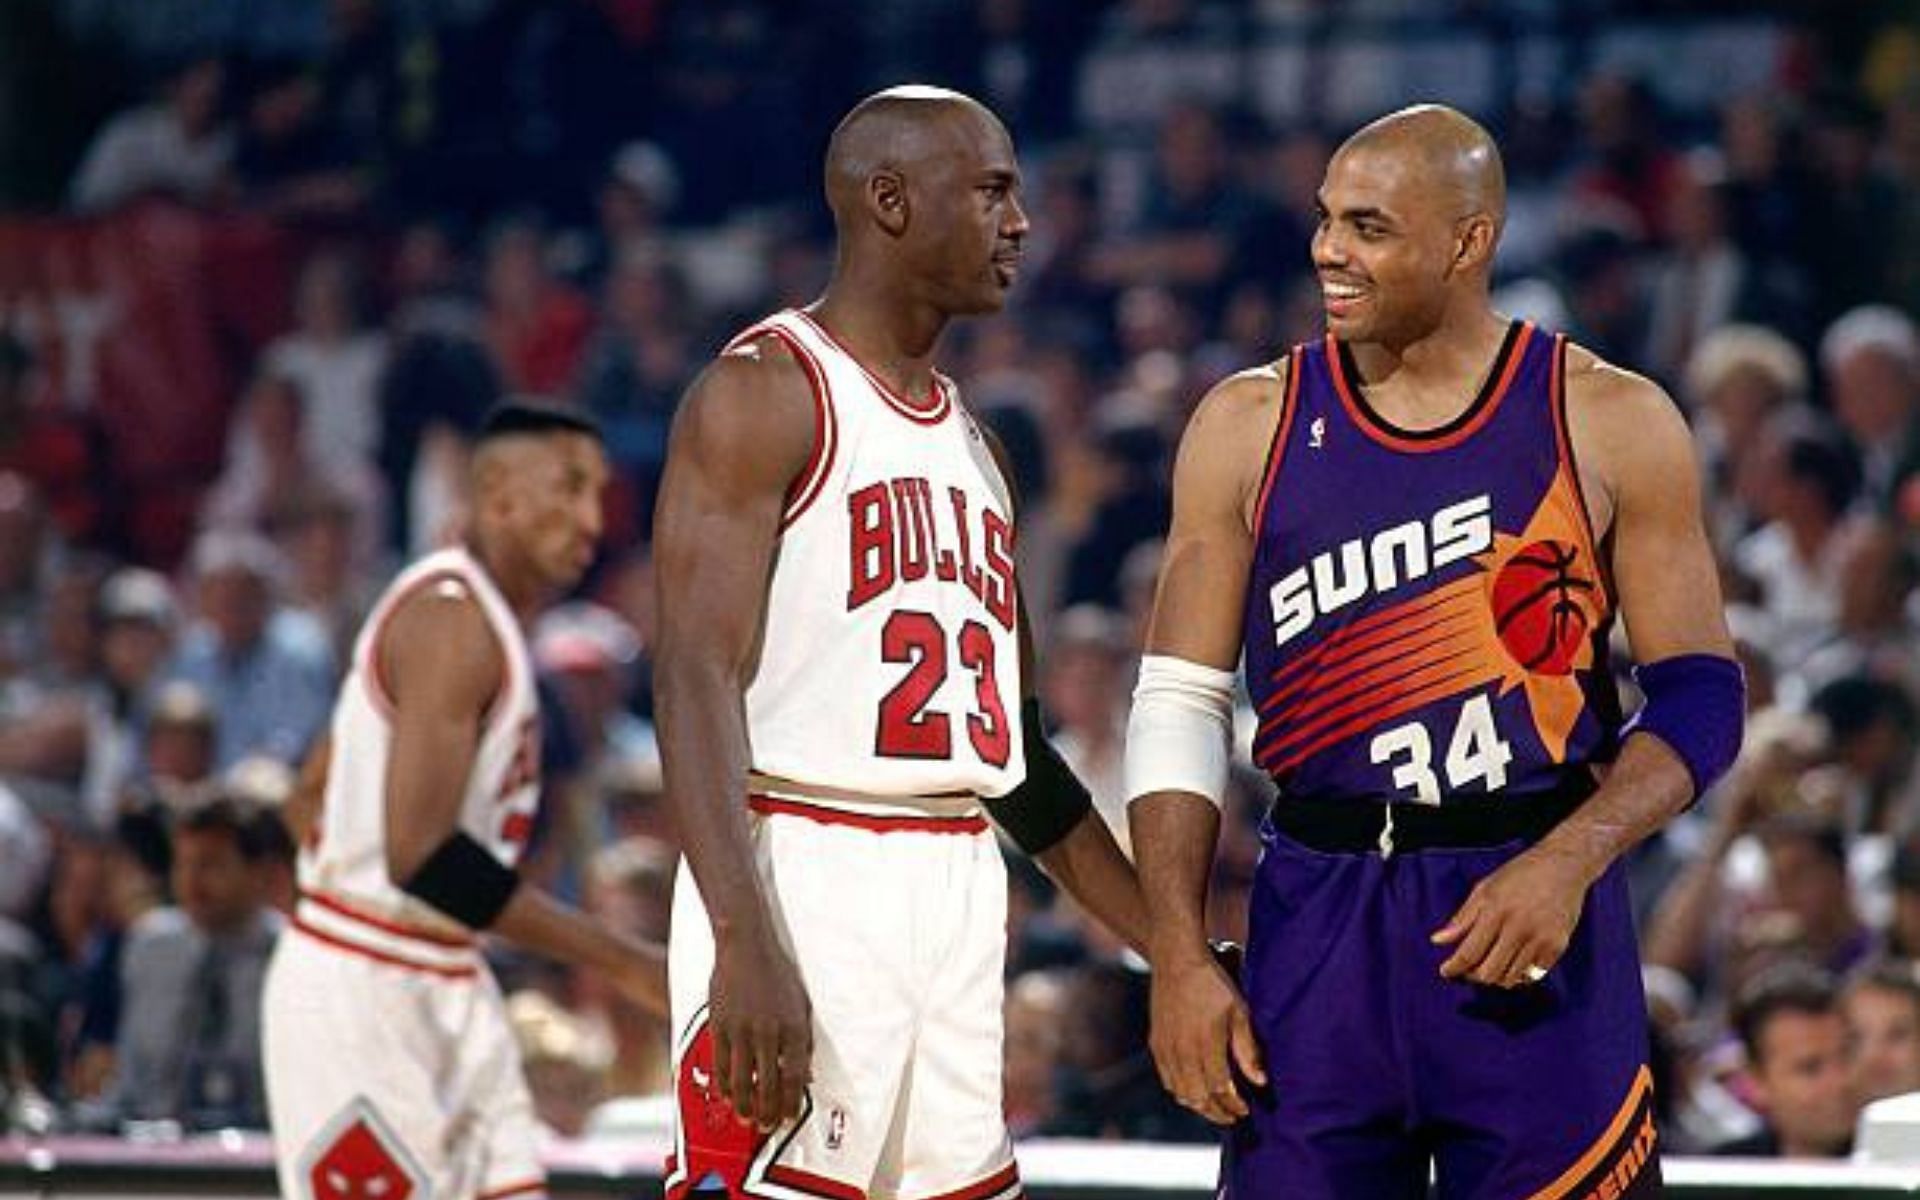 Michael Jordan and Charles Barkley during the 1993 NBA Finals [image courtesy of Andrew D. Bernstein/NBAE via Getty Images]